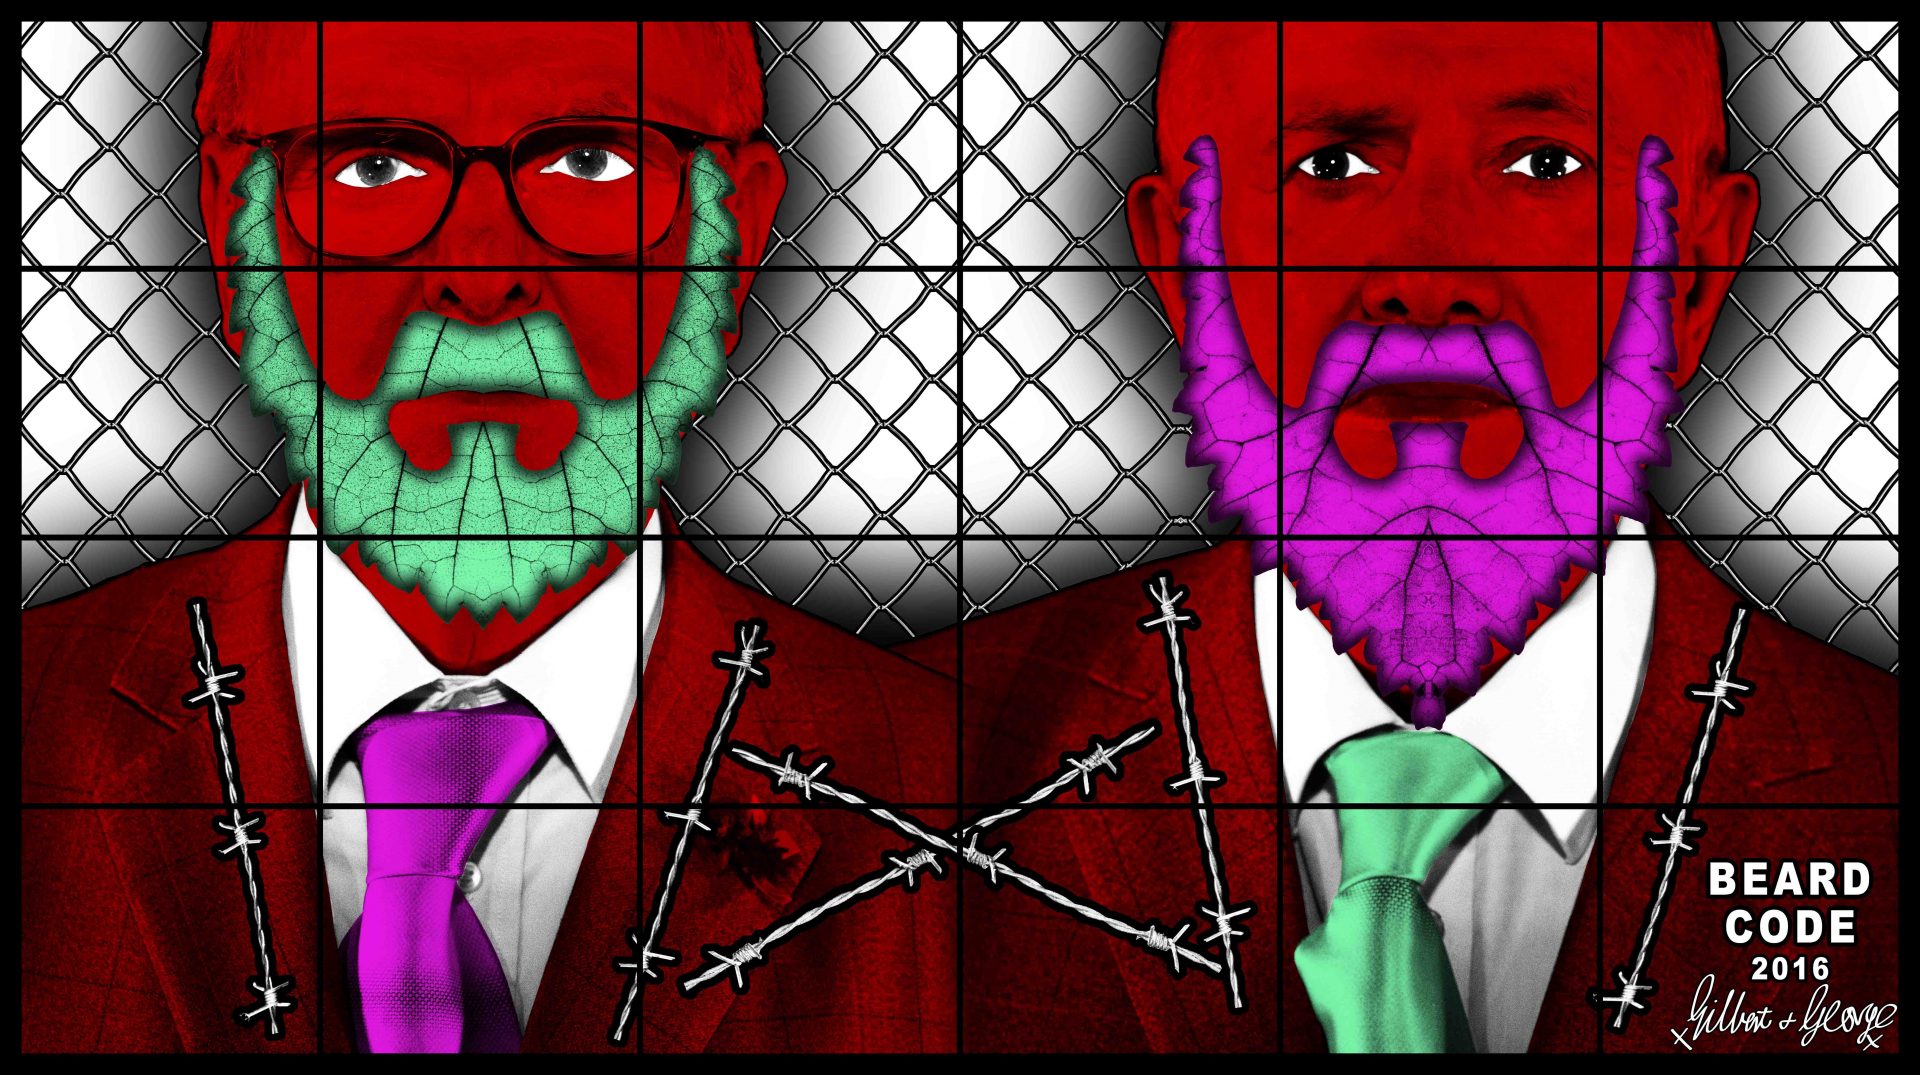 Lehmann Maupin gallery - Gilbert & George - The beard pictures